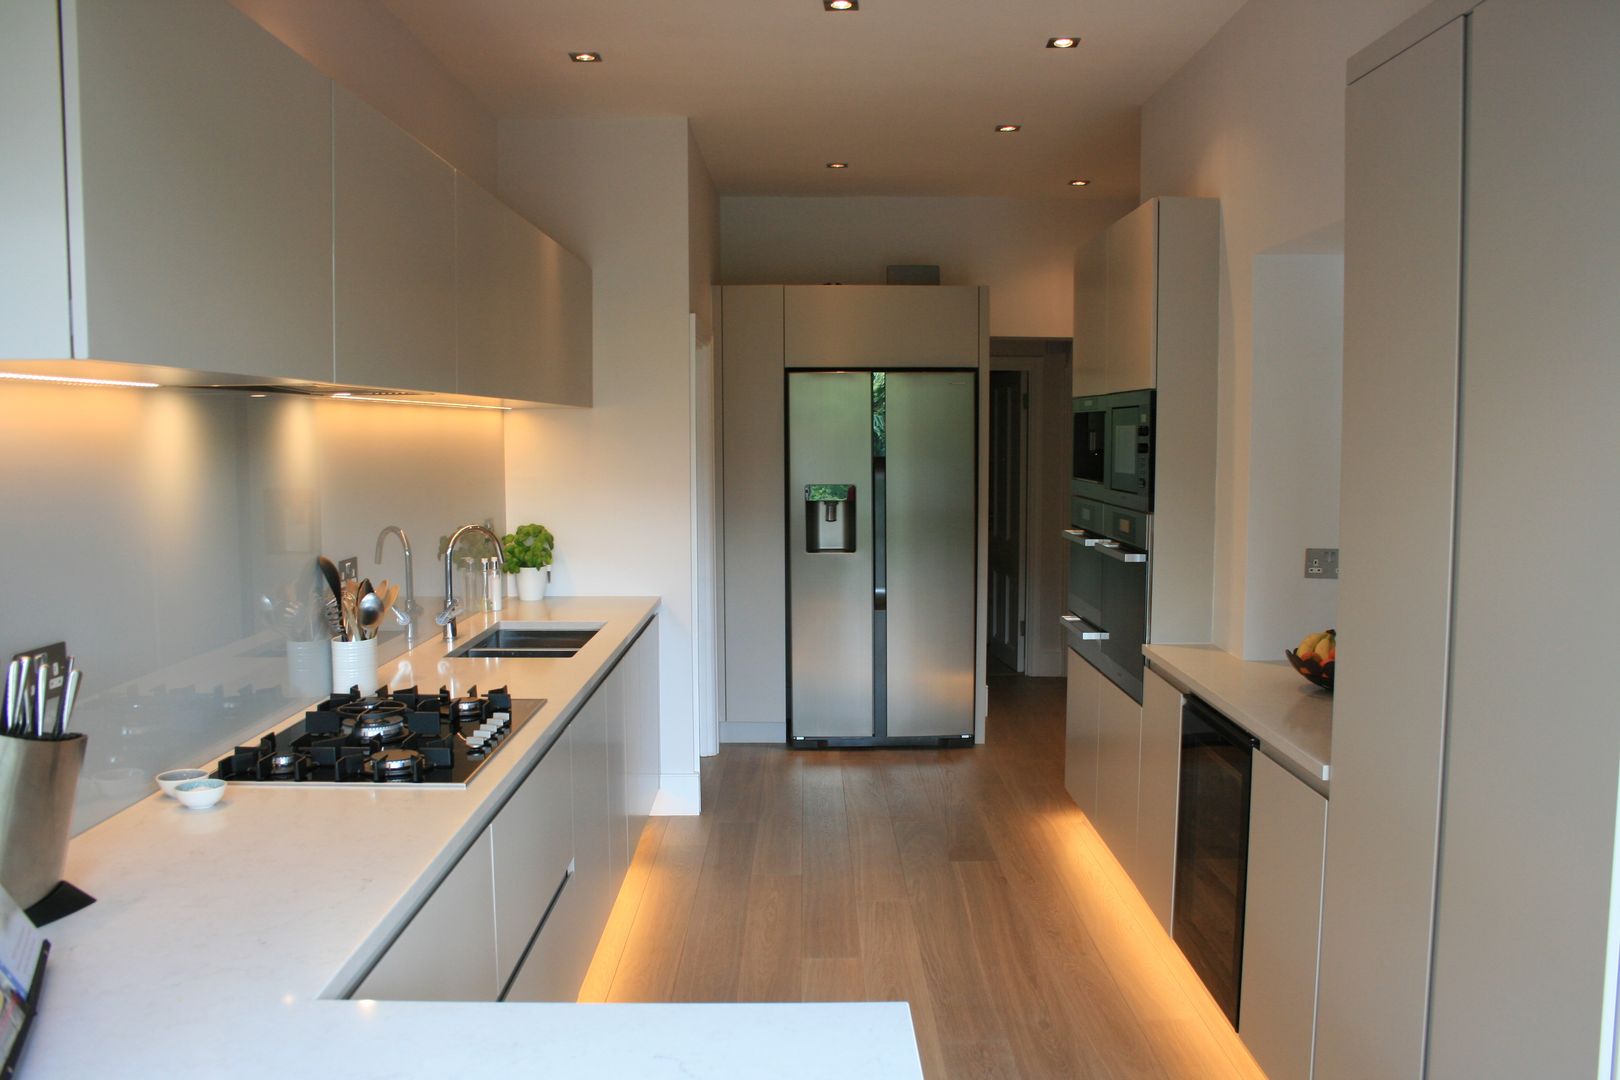 Barnes Kitchen , Place Design Kitchens and Interiors Place Design Kitchens and Interiors Cocinas minimalistas